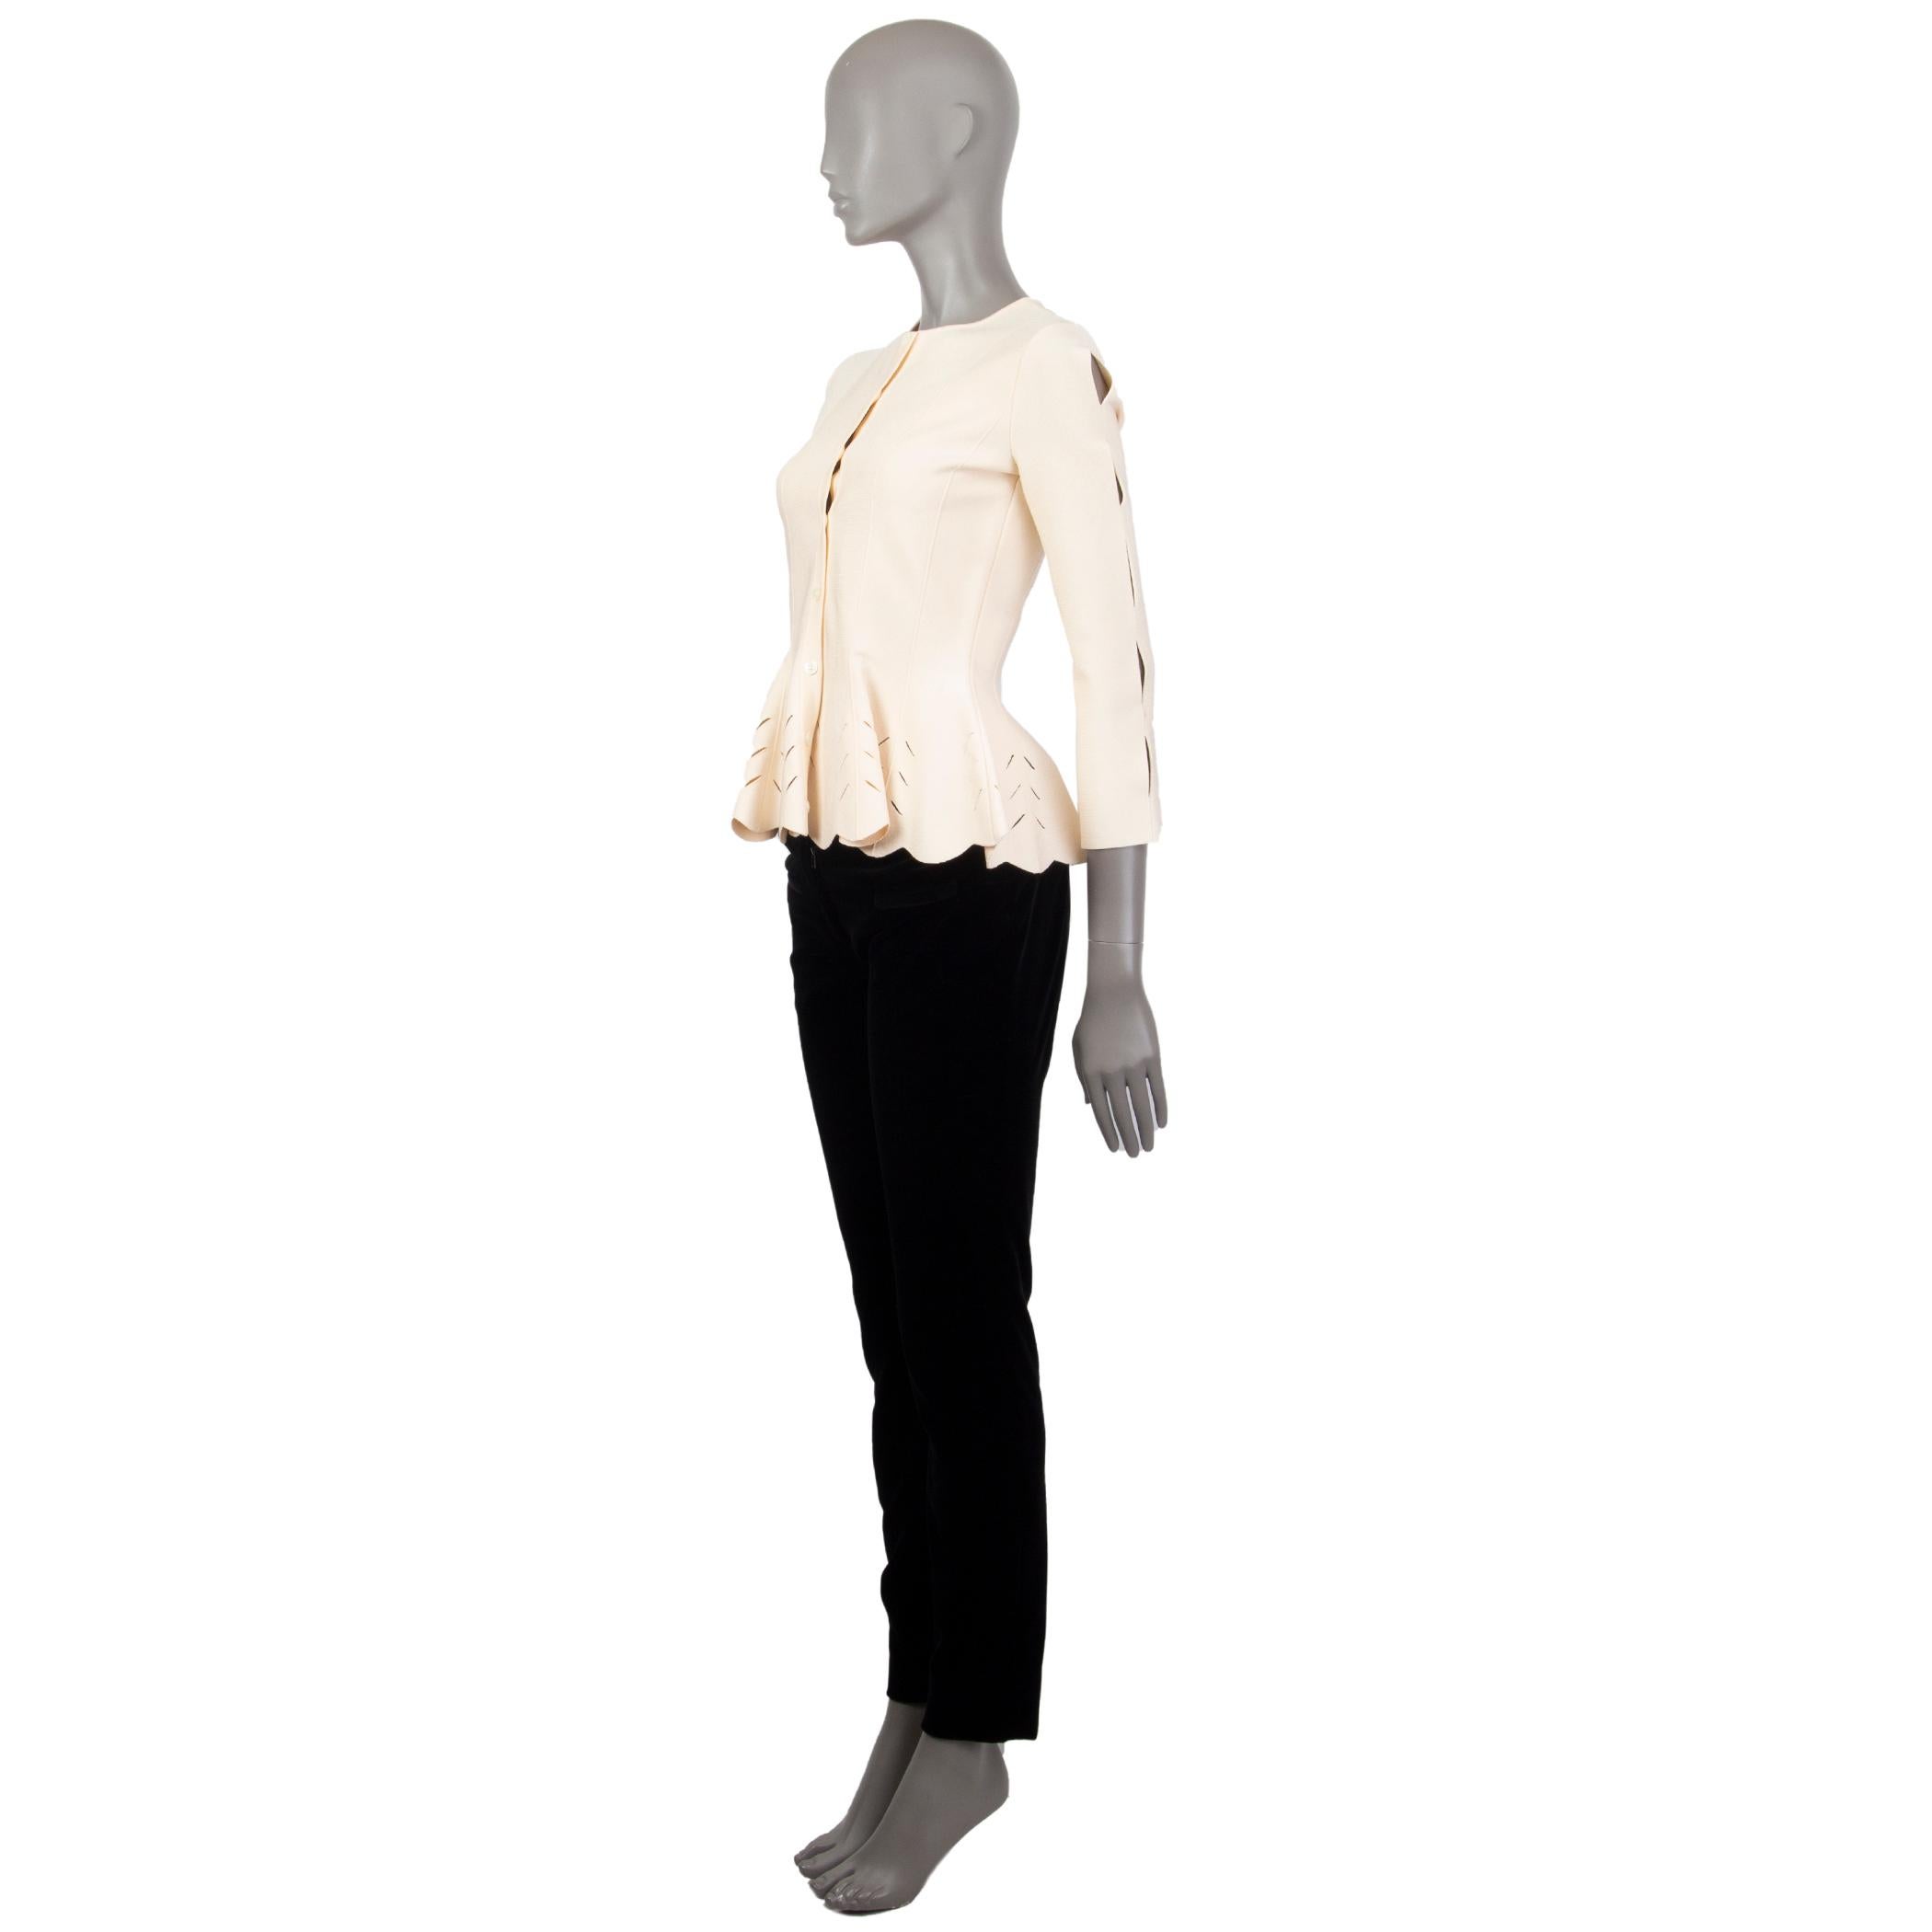 Alexander McQueen perforated-peplum cardigan in champagne viscose (83%) polyester (17%) with an hour-glass fit, detailed seam-lines, crew neck, 3/4 arms with cut-outs along the arms down. Closes with button fastening in the front. Has been worn and